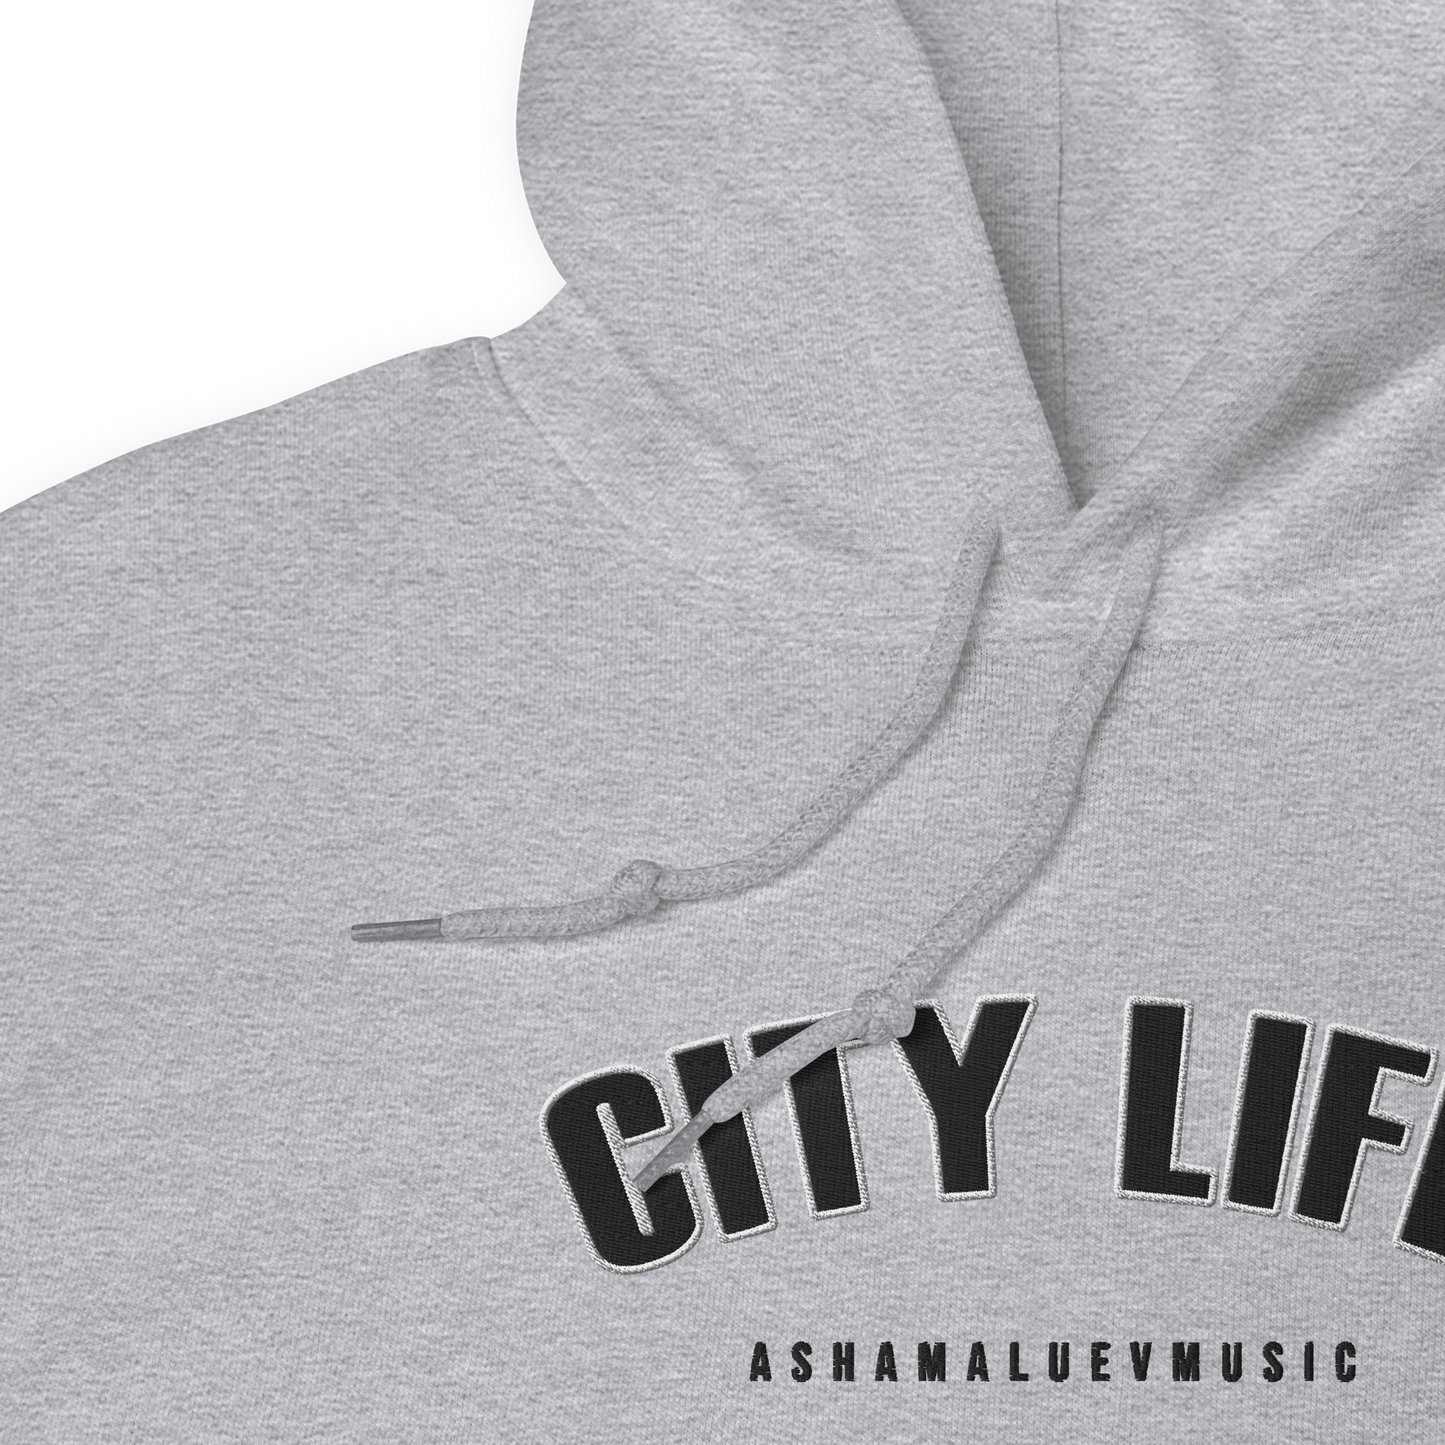 Hoodie "City Life" (Embroidery)